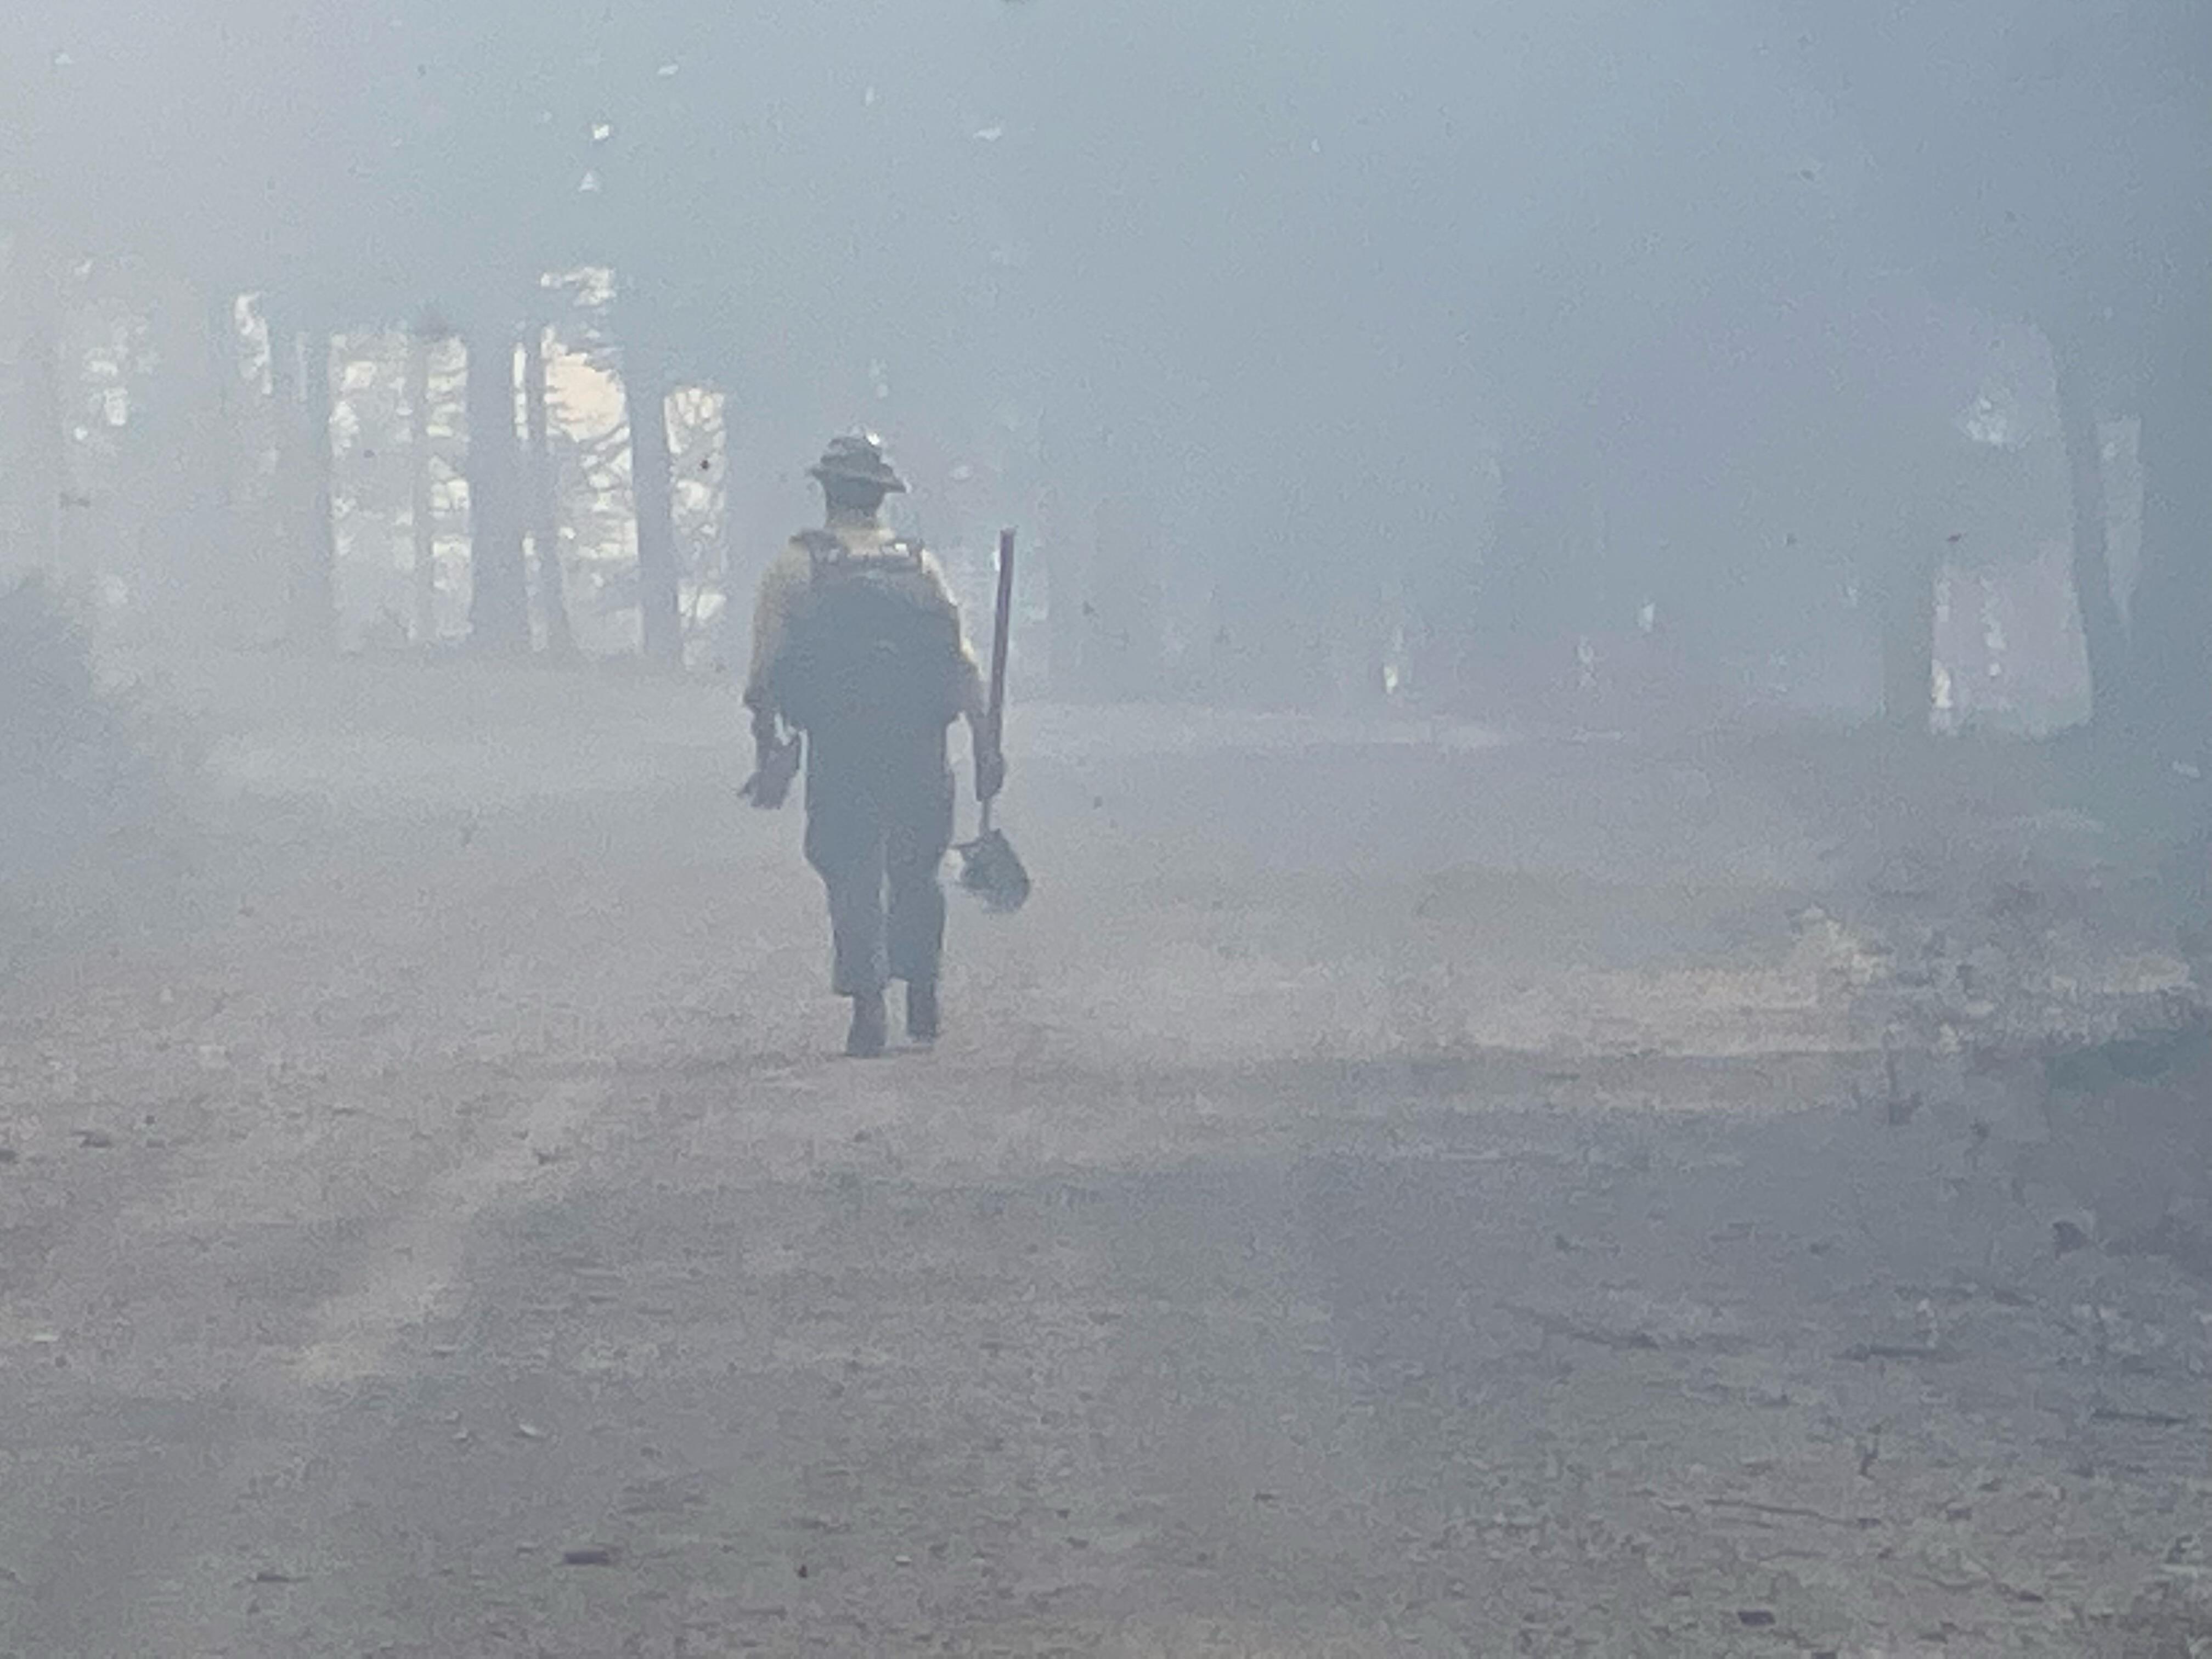 A wildland firefighter dressed in a yellow shirt, green pants, hardhat and backpack walks down a smoky hazy forested road